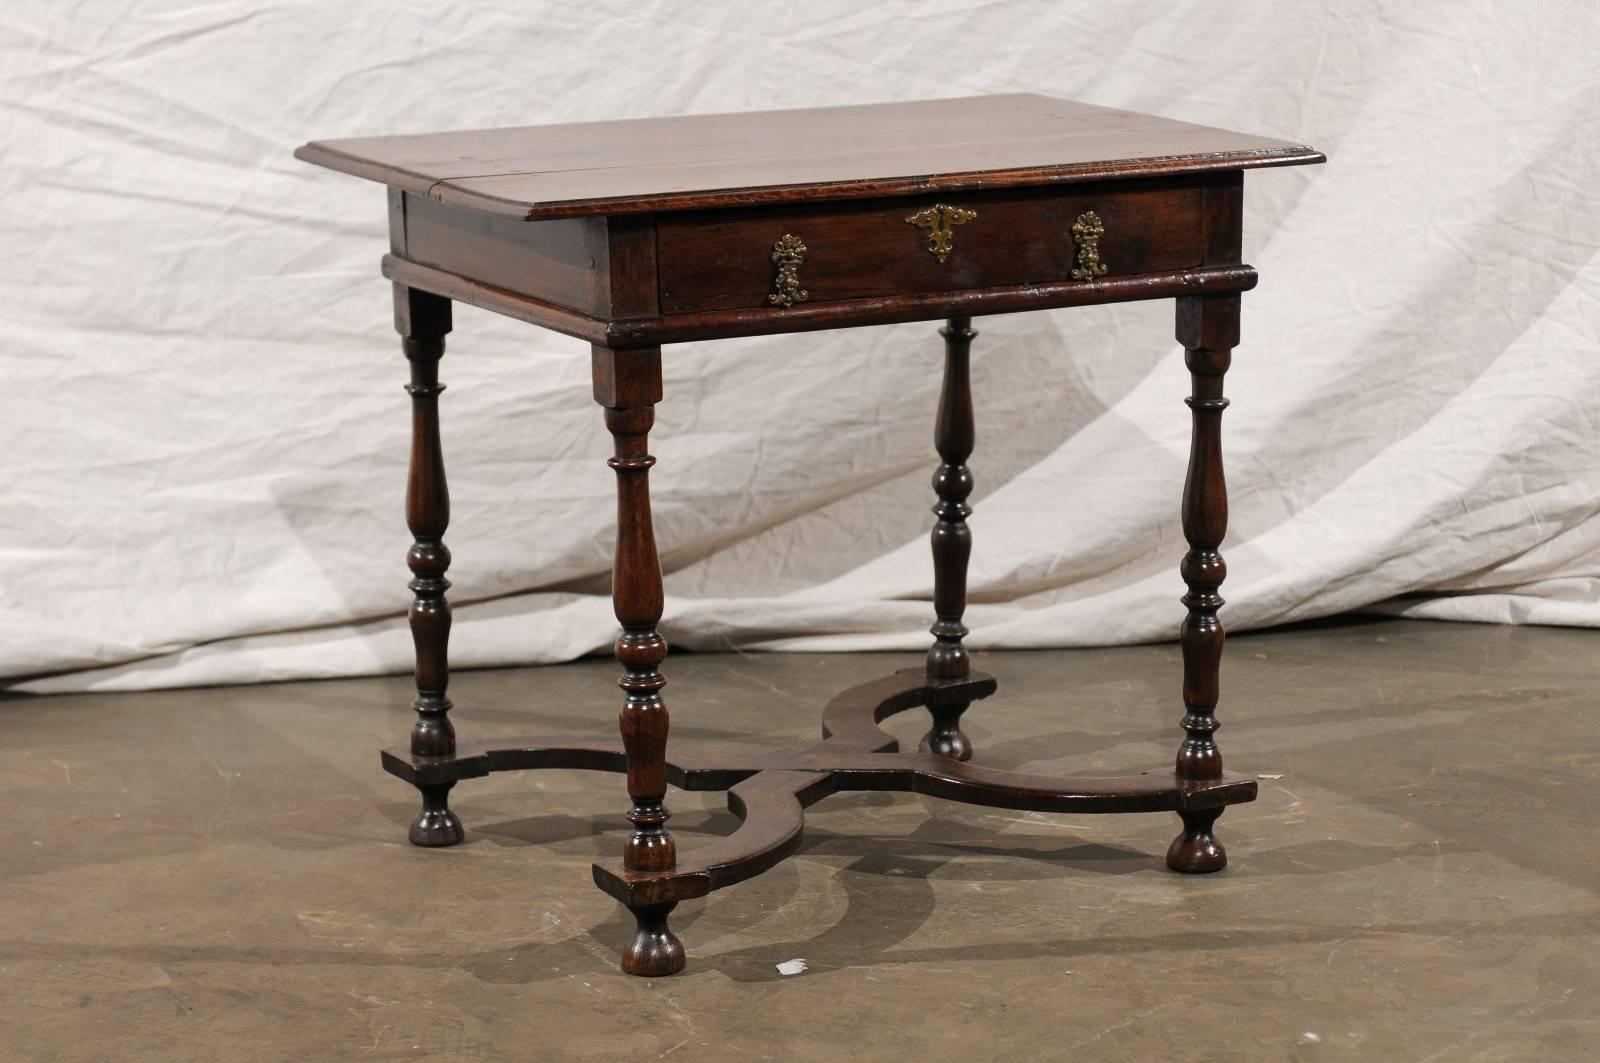 18th-19th century William and Mary oak one drawer table with stretcher.